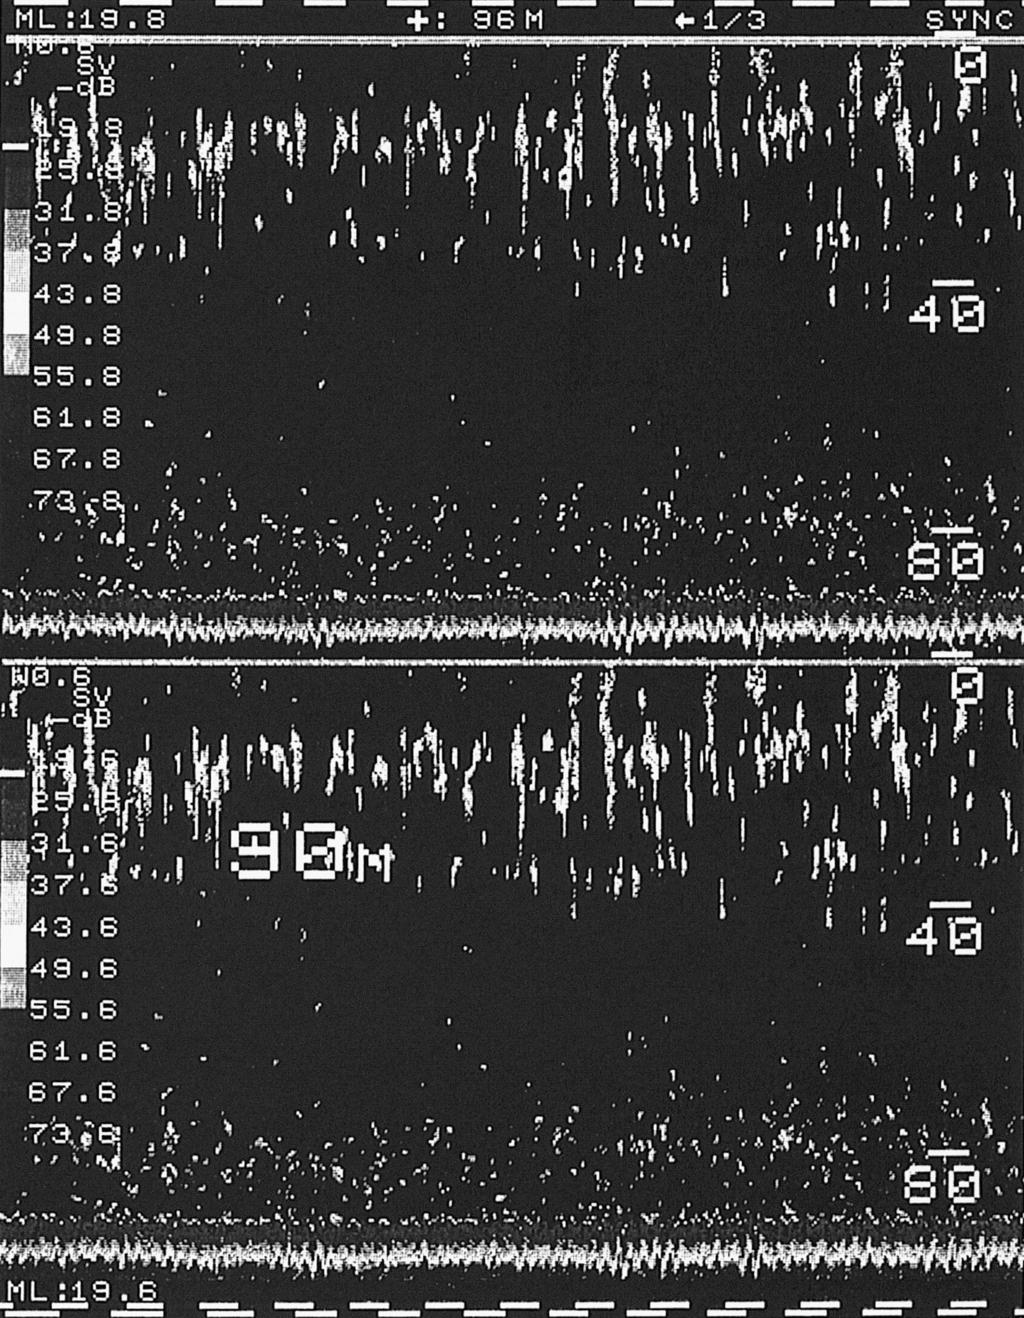 356 Y. Takao and M. Furusawa 5 Range (m) 5 1 25 3 35 Time Figure 4. An example echogram made on 17 September 1989, original in colour.